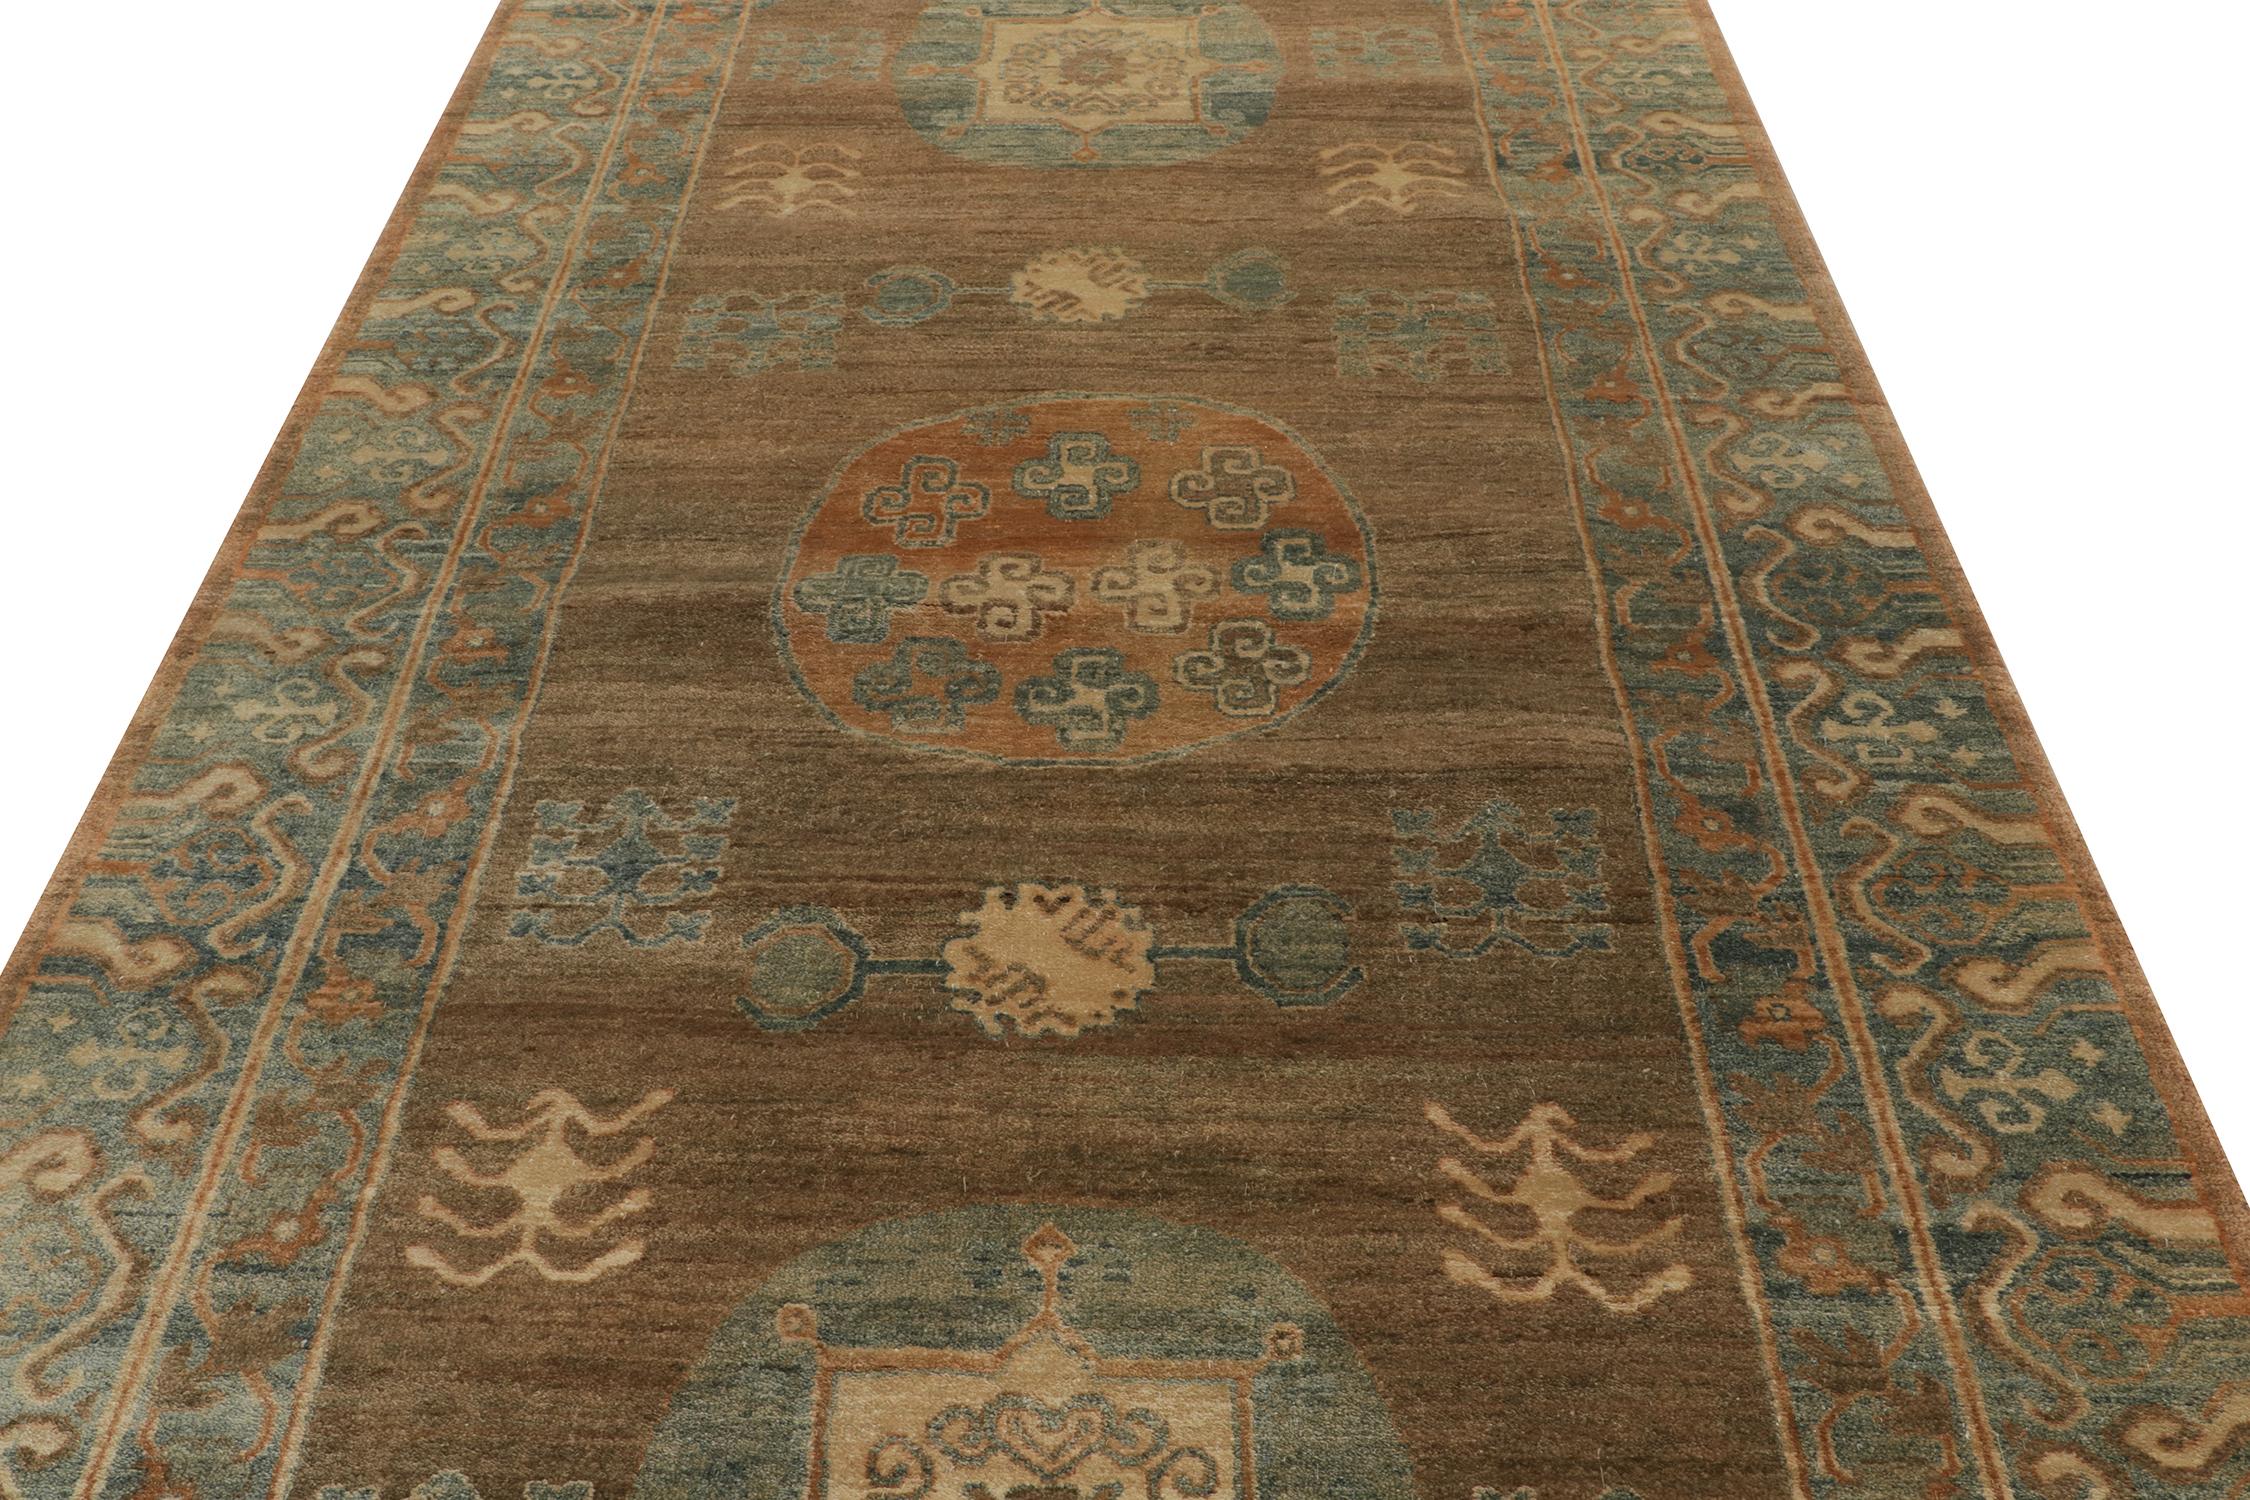 Hand-Knotted Rug & Kilim’s Khotan Samarkand Style Rug in Beige-Brown and Blue Medallion Style For Sale